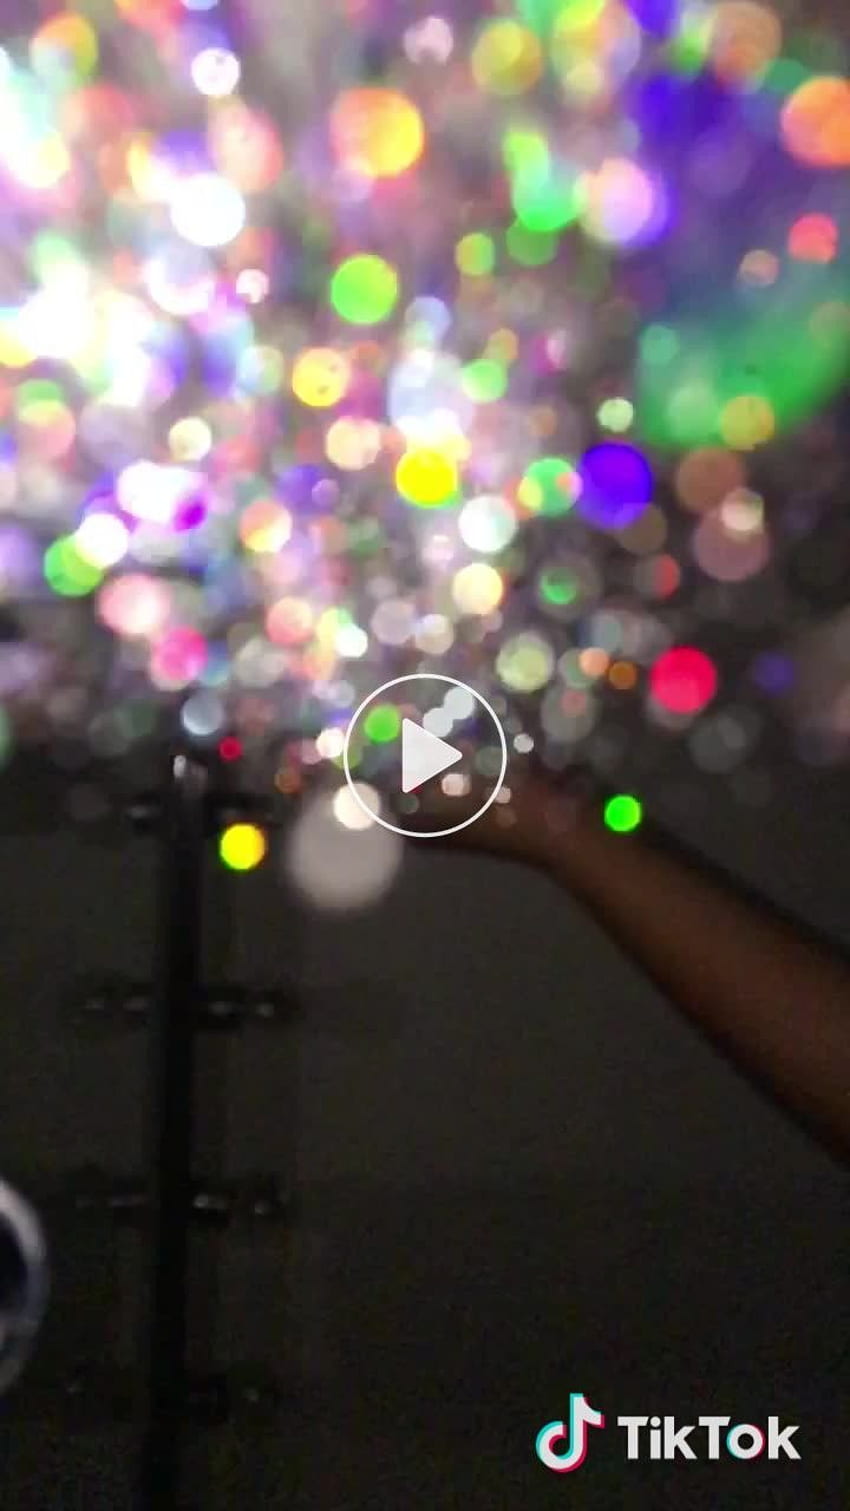 Video of a colorful tunnel of lights - TikTok